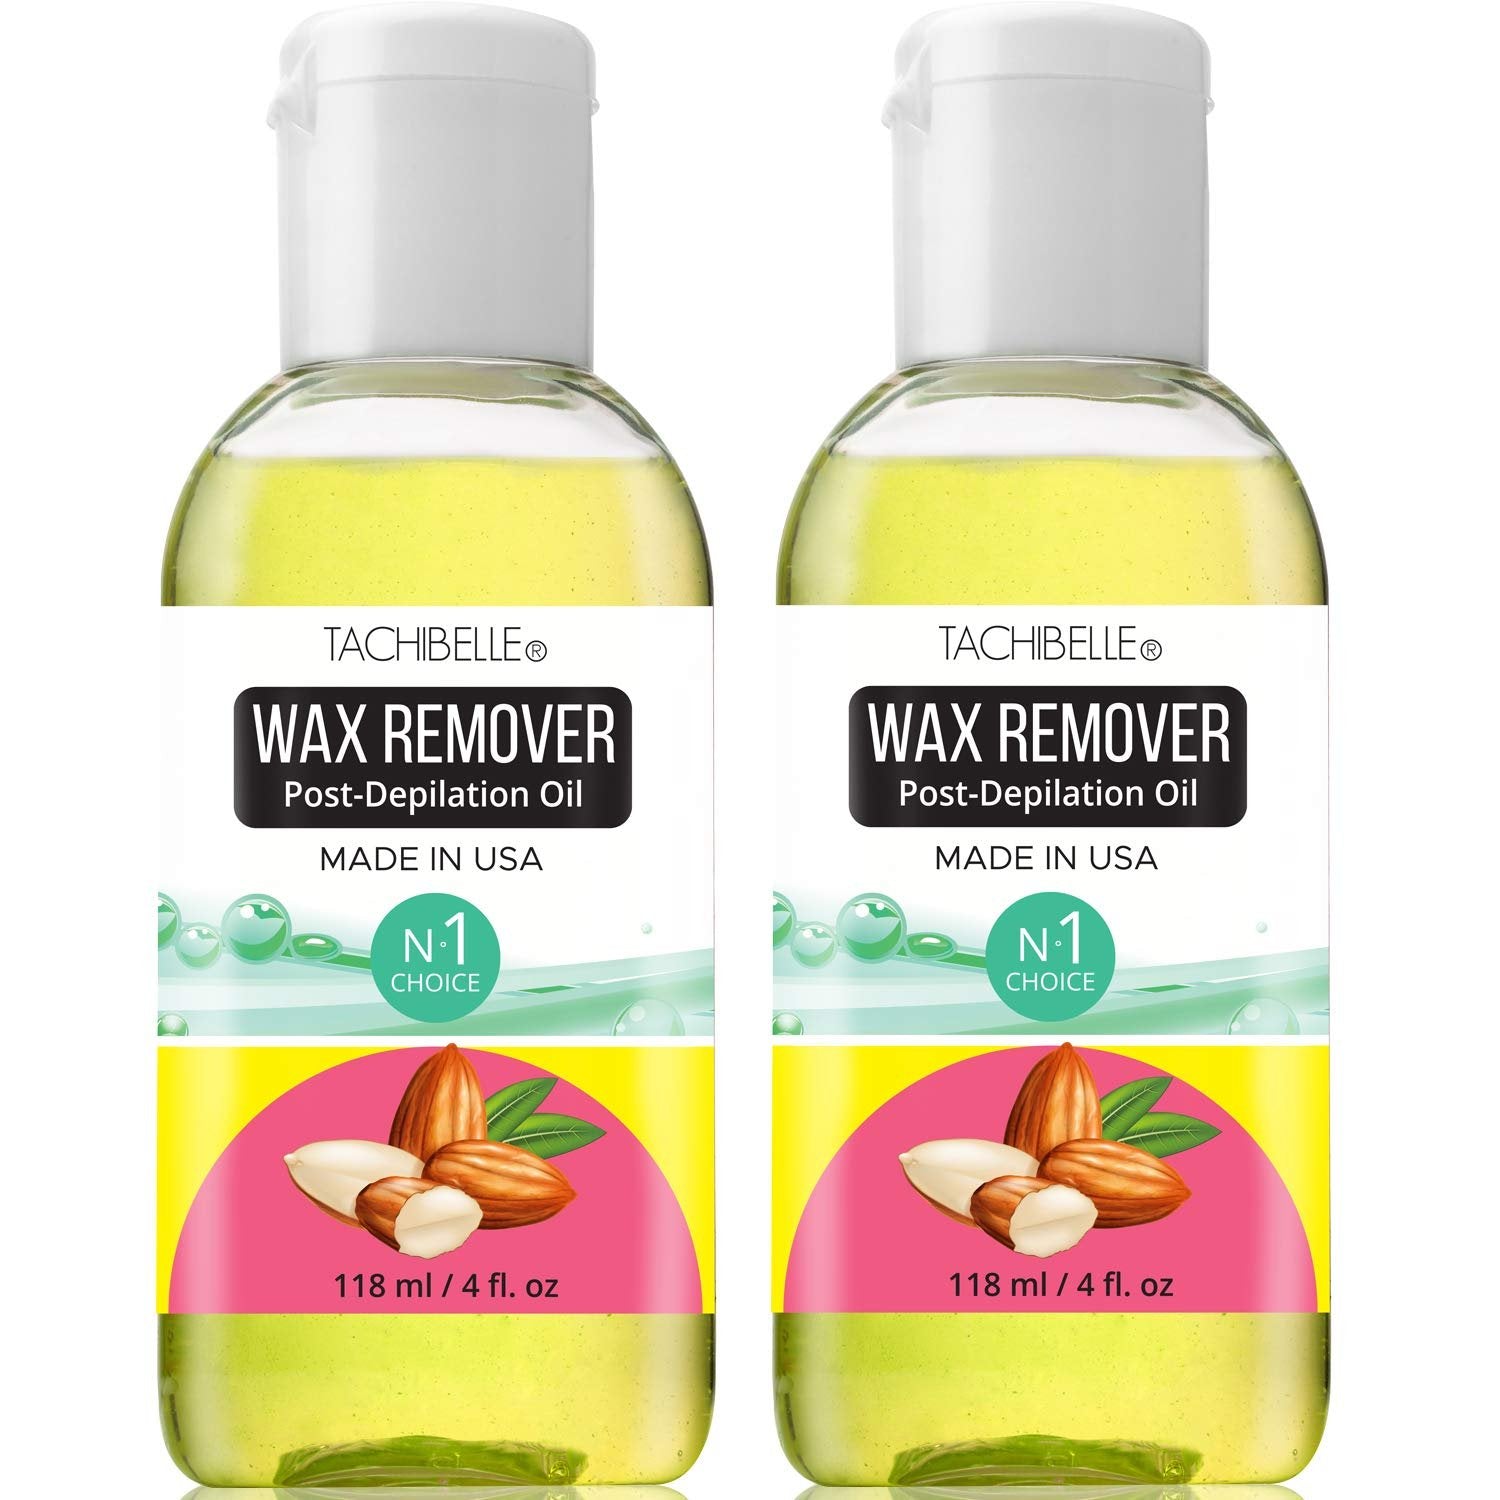 Tachibelle Wax Remover Post-Depilation Oil Enriched with Almond Oil Wax Off Remove After Wax Residue Remove Oil for SKIN MADE IN USA 4 OZ 2 Pieces